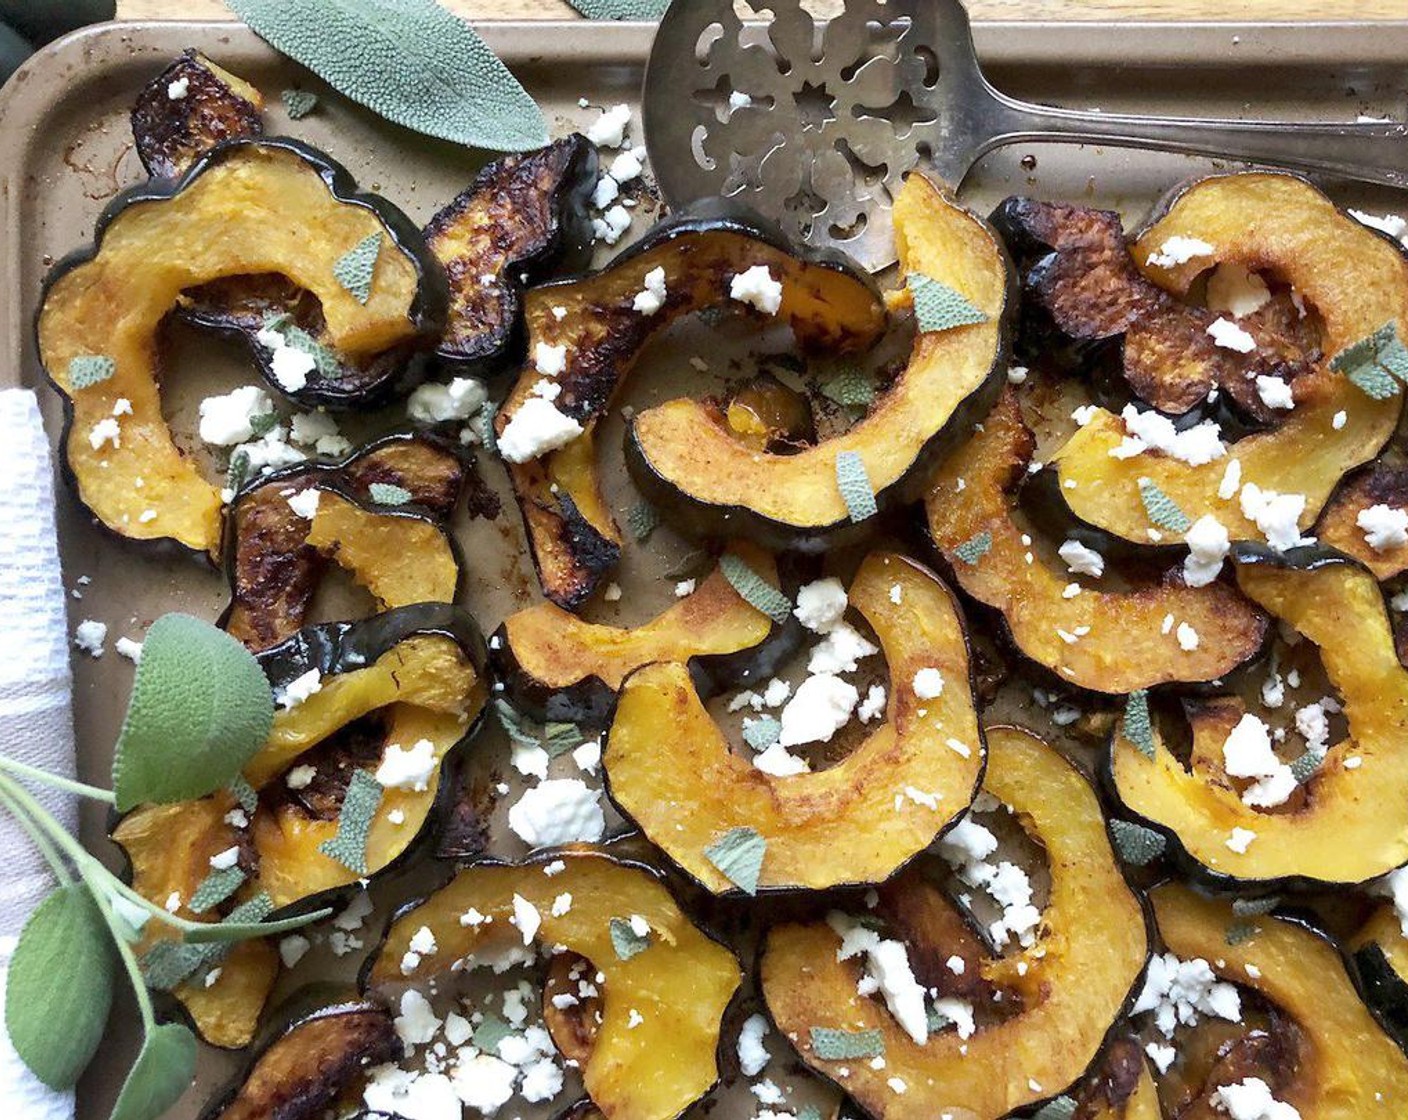 step 3 Bake for 30 to 35 minutes or until tender with caramelized edges, switching racks halfway through. Transfer the roasted squash to a serving platter; sprinkle with Sage Leaves (6) and Crumbled Feta Cheese (1/2 cup). If desired, garnish with additional fresh sage leaves. Serve immediately and enjoy!